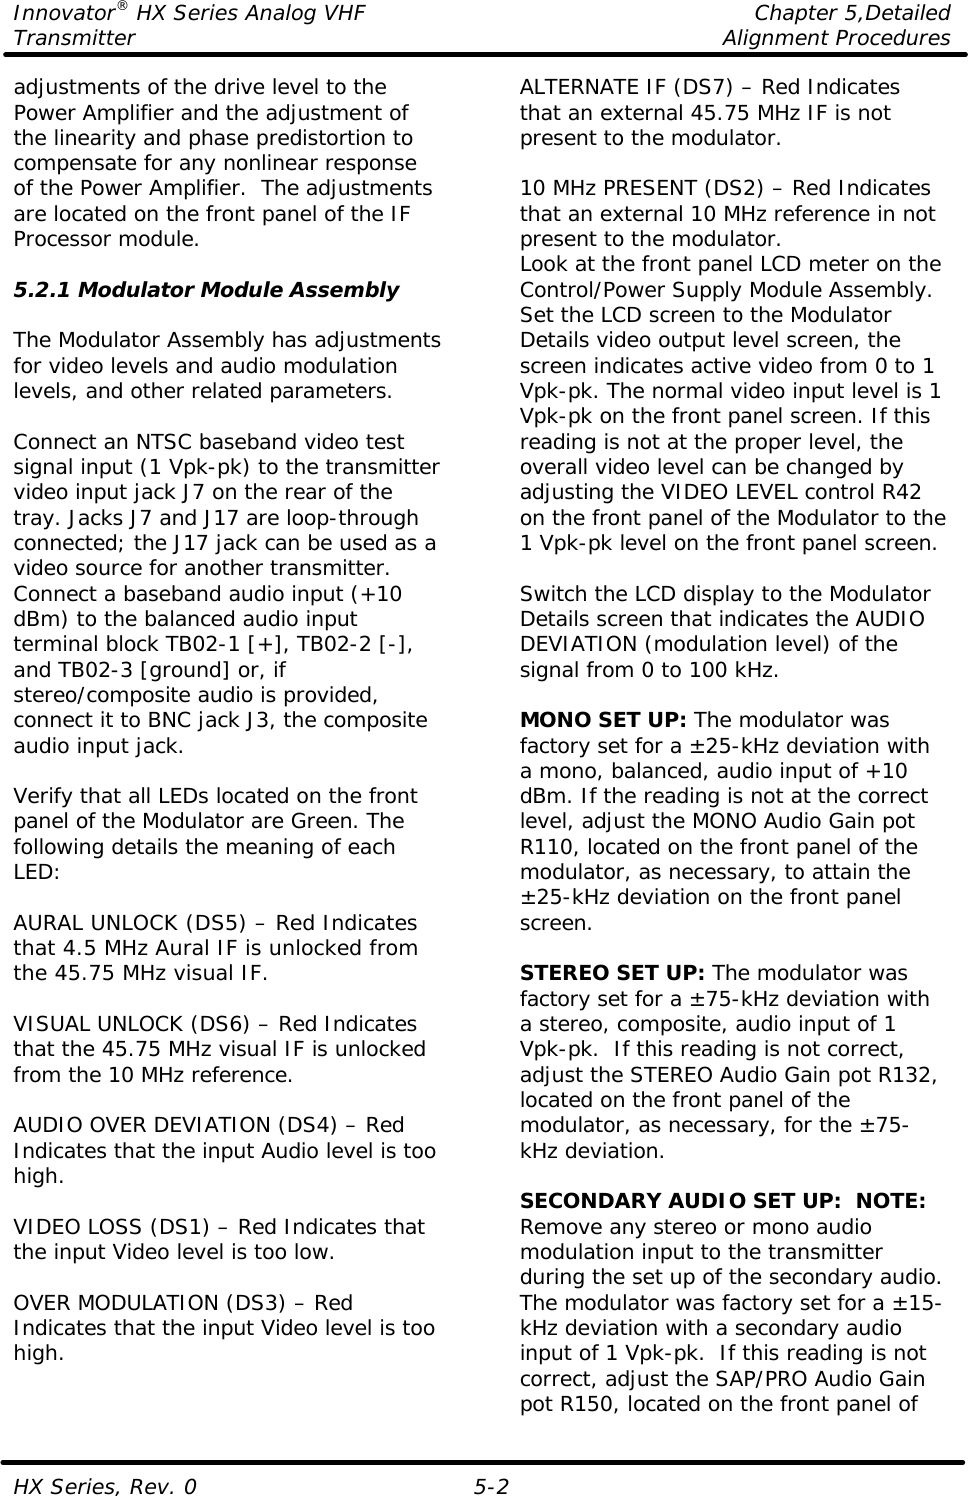 Innovator® HX Series Analog VHF    Chapter 5,Detailed Transmitter    Alignment Procedures  HX Series, Rev. 0 5-2 adjustments of the drive level to the Power Amplifier and the adjustment of the linearity and phase predistortion to compensate for any nonlinear response of the Power Amplifier.  The adjustments are located on the front panel of the IF Processor module.  5.2.1 Modulator Module Assembly  The Modulator Assembly has adjustments for video levels and audio modulation levels, and other related parameters.    Connect an NTSC baseband video test signal input (1 Vpk-pk) to the transmitter video input jack J7 on the rear of the tray. Jacks J7 and J17 are loop-through connected; the J17 jack can be used as a video source for another transmitter. Connect a baseband audio input (+10 dBm) to the balanced audio input terminal block TB02-1 [+], TB02-2 [-], and TB02-3 [ground] or, if stereo/composite audio is provided, connect it to BNC jack J3, the composite audio input jack.  Verify that all LEDs located on the front panel of the Modulator are Green. The following details the meaning of each LED:  AURAL UNLOCK (DS5) – Red Indicates that 4.5 MHz Aural IF is unlocked from the 45.75 MHz visual IF.  VISUAL UNLOCK (DS6) – Red Indicates that the 45.75 MHz visual IF is unlocked from the 10 MHz reference.  AUDIO OVER DEVIATION (DS4) – Red Indicates that the input Audio level is too high.  VIDEO LOSS (DS1) – Red Indicates that the input Video level is too low.  OVER MODULATION (DS3) – Red Indicates that the input Video level is too high. ALTERNATE IF (DS7) – Red Indicates that an external 45.75 MHz IF is not present to the modulator.  10 MHz PRESENT (DS2) – Red Indicates that an external 10 MHz reference in not present to the modulator. Look at the front panel LCD meter on the Control/Power Supply Module Assembly.  Set the LCD screen to the Modulator Details video output level screen, the screen indicates active video from 0 to 1 Vpk-pk. The normal video input level is 1 Vpk-pk on the front panel screen. If this reading is not at the proper level, the overall video level can be changed by adjusting the VIDEO LEVEL control R42 on the front panel of the Modulator to the 1 Vpk-pk level on the front panel screen.  Switch the LCD display to the Modulator Details screen that indicates the AUDIO DEVIATION (modulation level) of the signal from 0 to 100 kHz.  MONO SET UP: The modulator was factory set for a ±25-kHz deviation with a mono, balanced, audio input of +10 dBm. If the reading is not at the correct level, adjust the MONO Audio Gain pot R110, located on the front panel of the modulator, as necessary, to attain the ±25-kHz deviation on the front panel screen.  STEREO SET UP: The modulator was factory set for a ±75-kHz deviation with a stereo, composite, audio input of 1 Vpk-pk.  If this reading is not correct, adjust the STEREO Audio Gain pot R132, located on the front panel of the modulator, as necessary, for the ±75-kHz deviation.  SECONDARY AUDIO SET UP:  NOTE: Remove any stereo or mono audio modulation input to the transmitter during the set up of the secondary audio.  The modulator was factory set for a ±15-kHz deviation with a secondary audio input of 1 Vpk-pk.  If this reading is not correct, adjust the SAP/PRO Audio Gain pot R150, located on the front panel of 